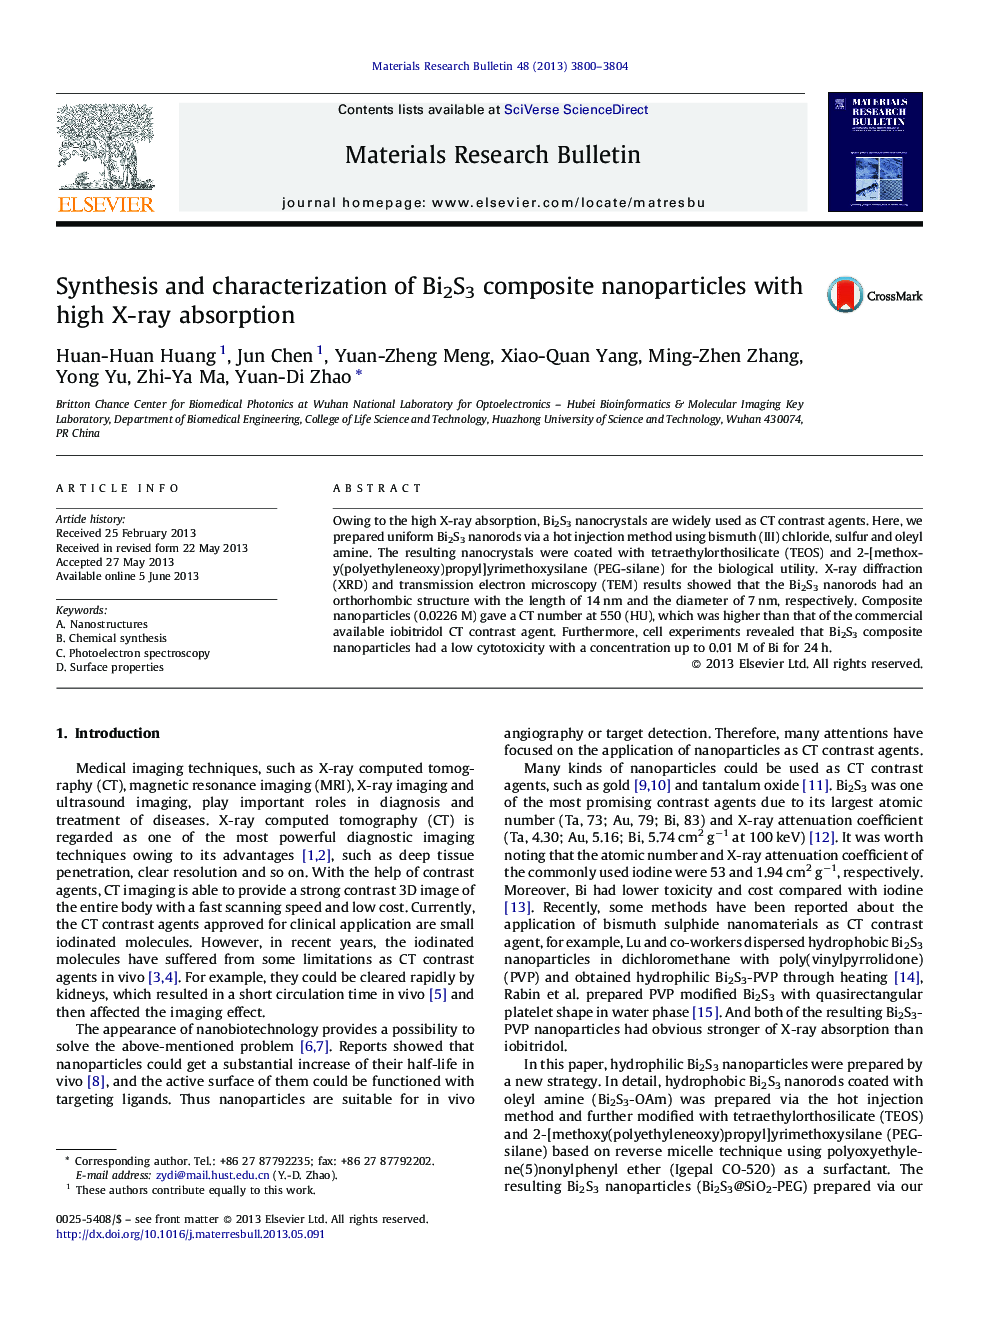 Synthesis and characterization of Bi2S3 composite nanoparticles with high X-ray absorption